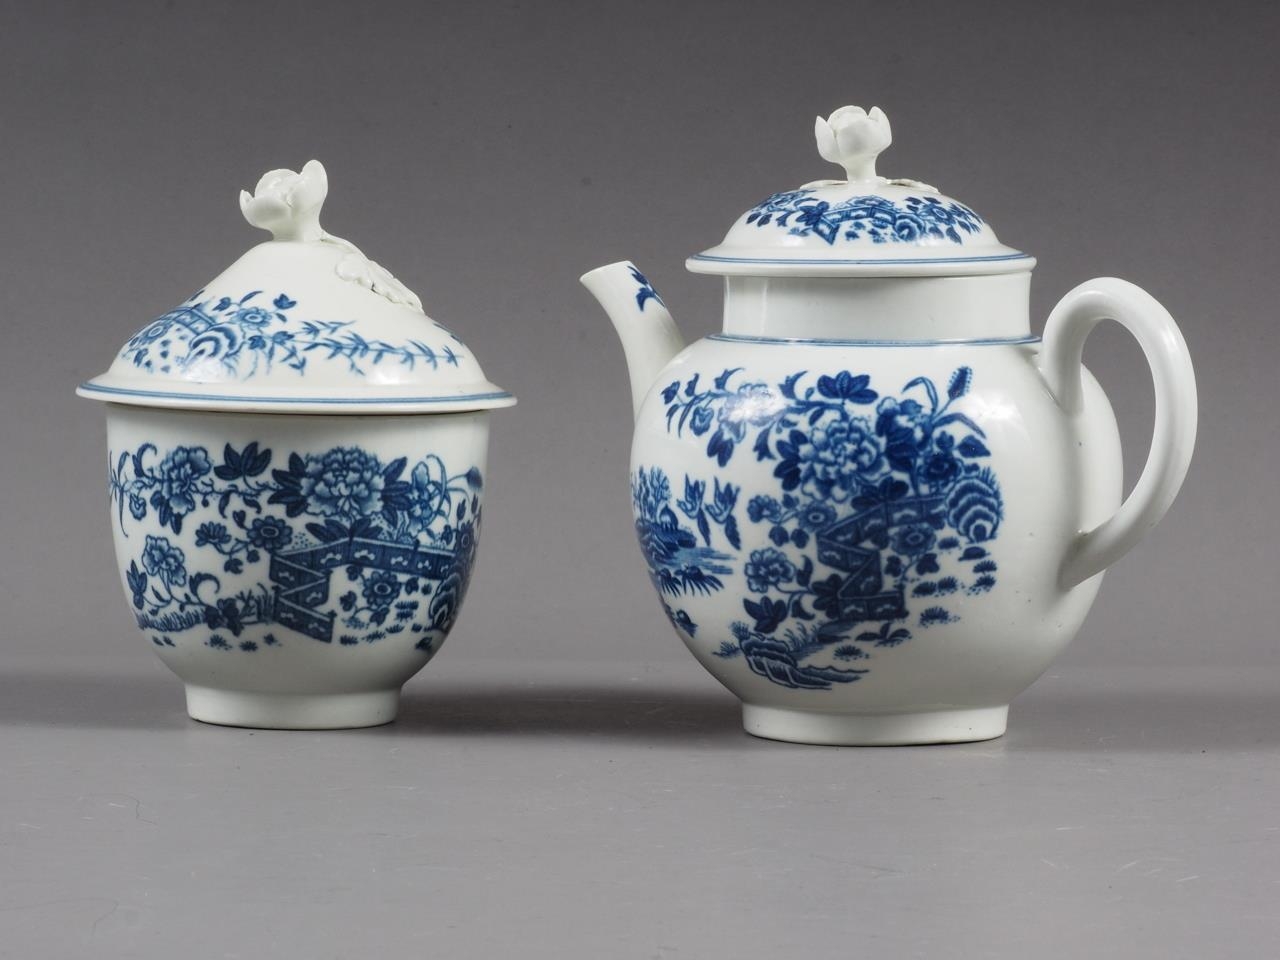 An 18th century Worcester blue and white "Chinese fence" pattern teapot and a similar lidded sucrier